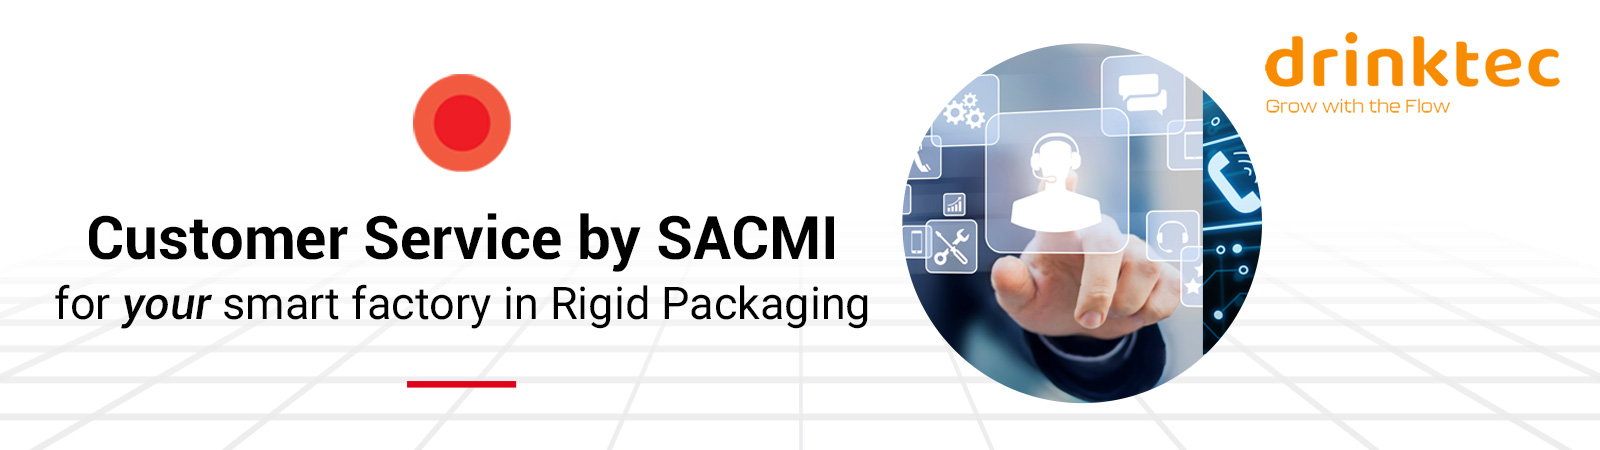 Customer Service by SACMI for your smart factory in Rigid Packaging – Watin’ for Drinktec 2022 